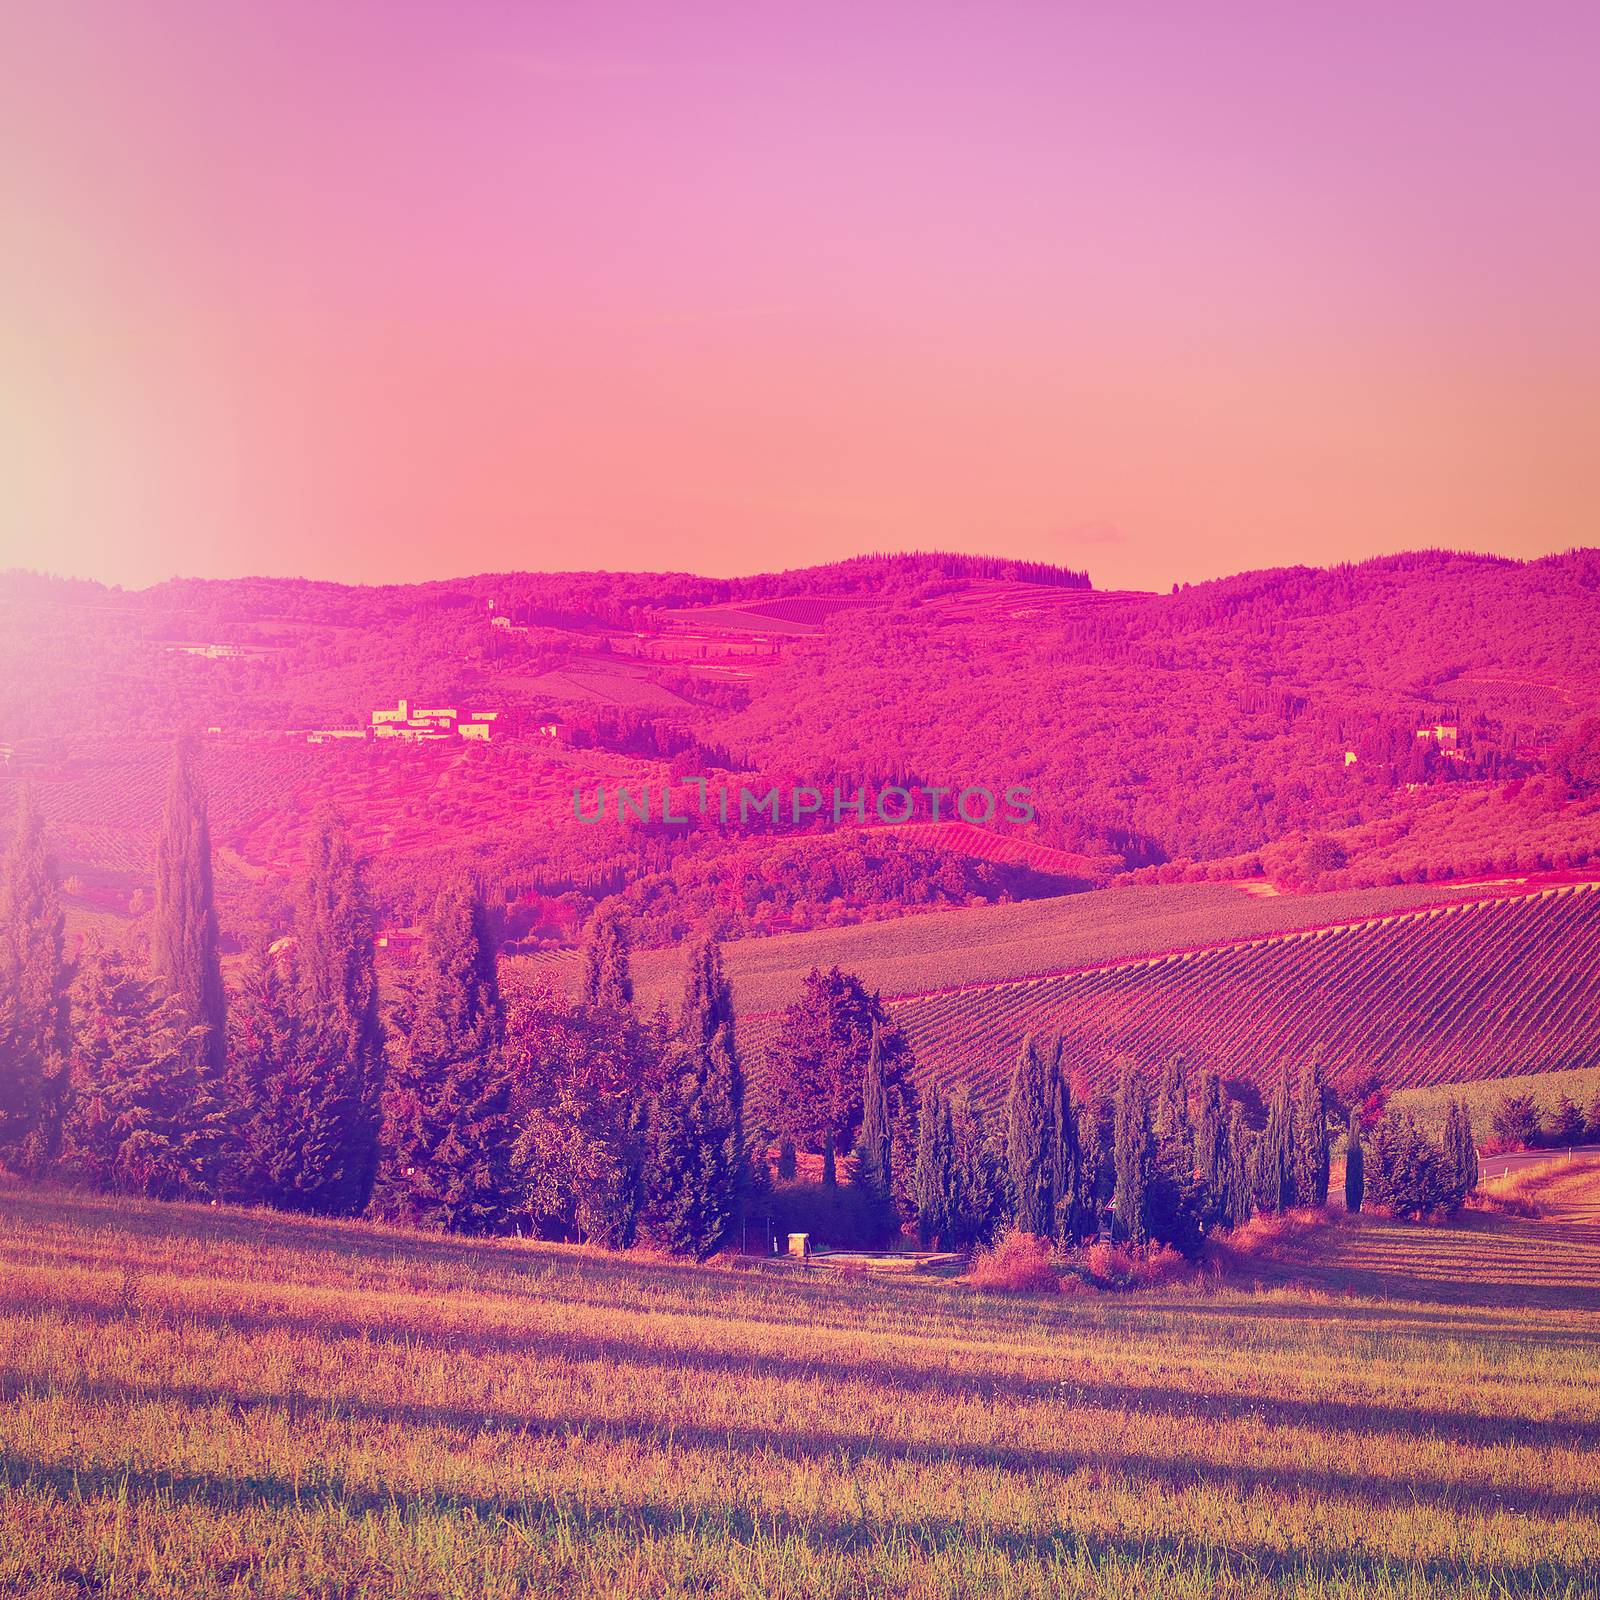 Hill of Tuscany by gkuna